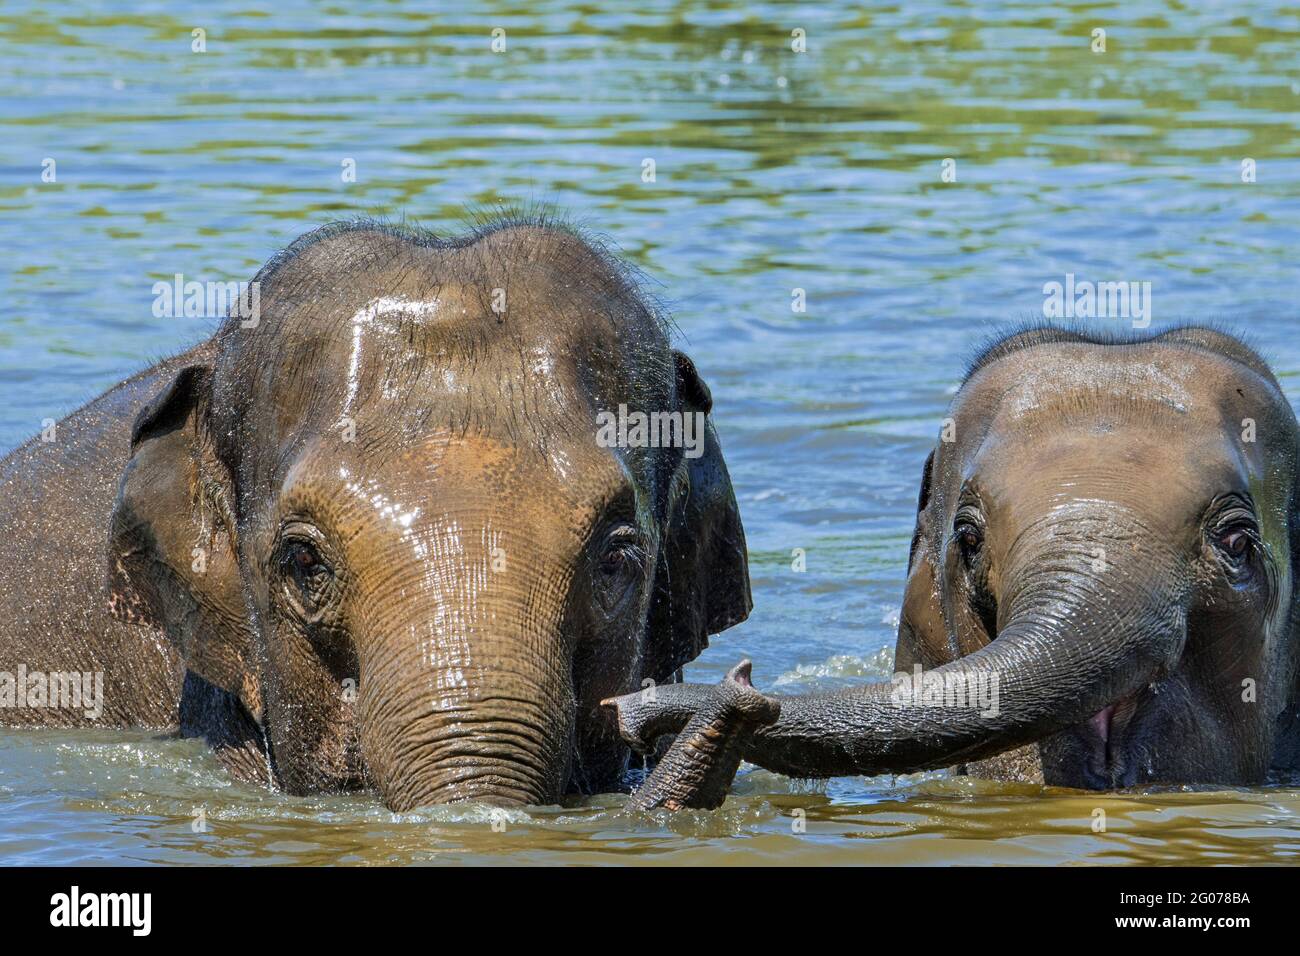 Asian elephant / Asiatic elephant (Elephas maximus) cow / female with calf bathing in river Stock Photo